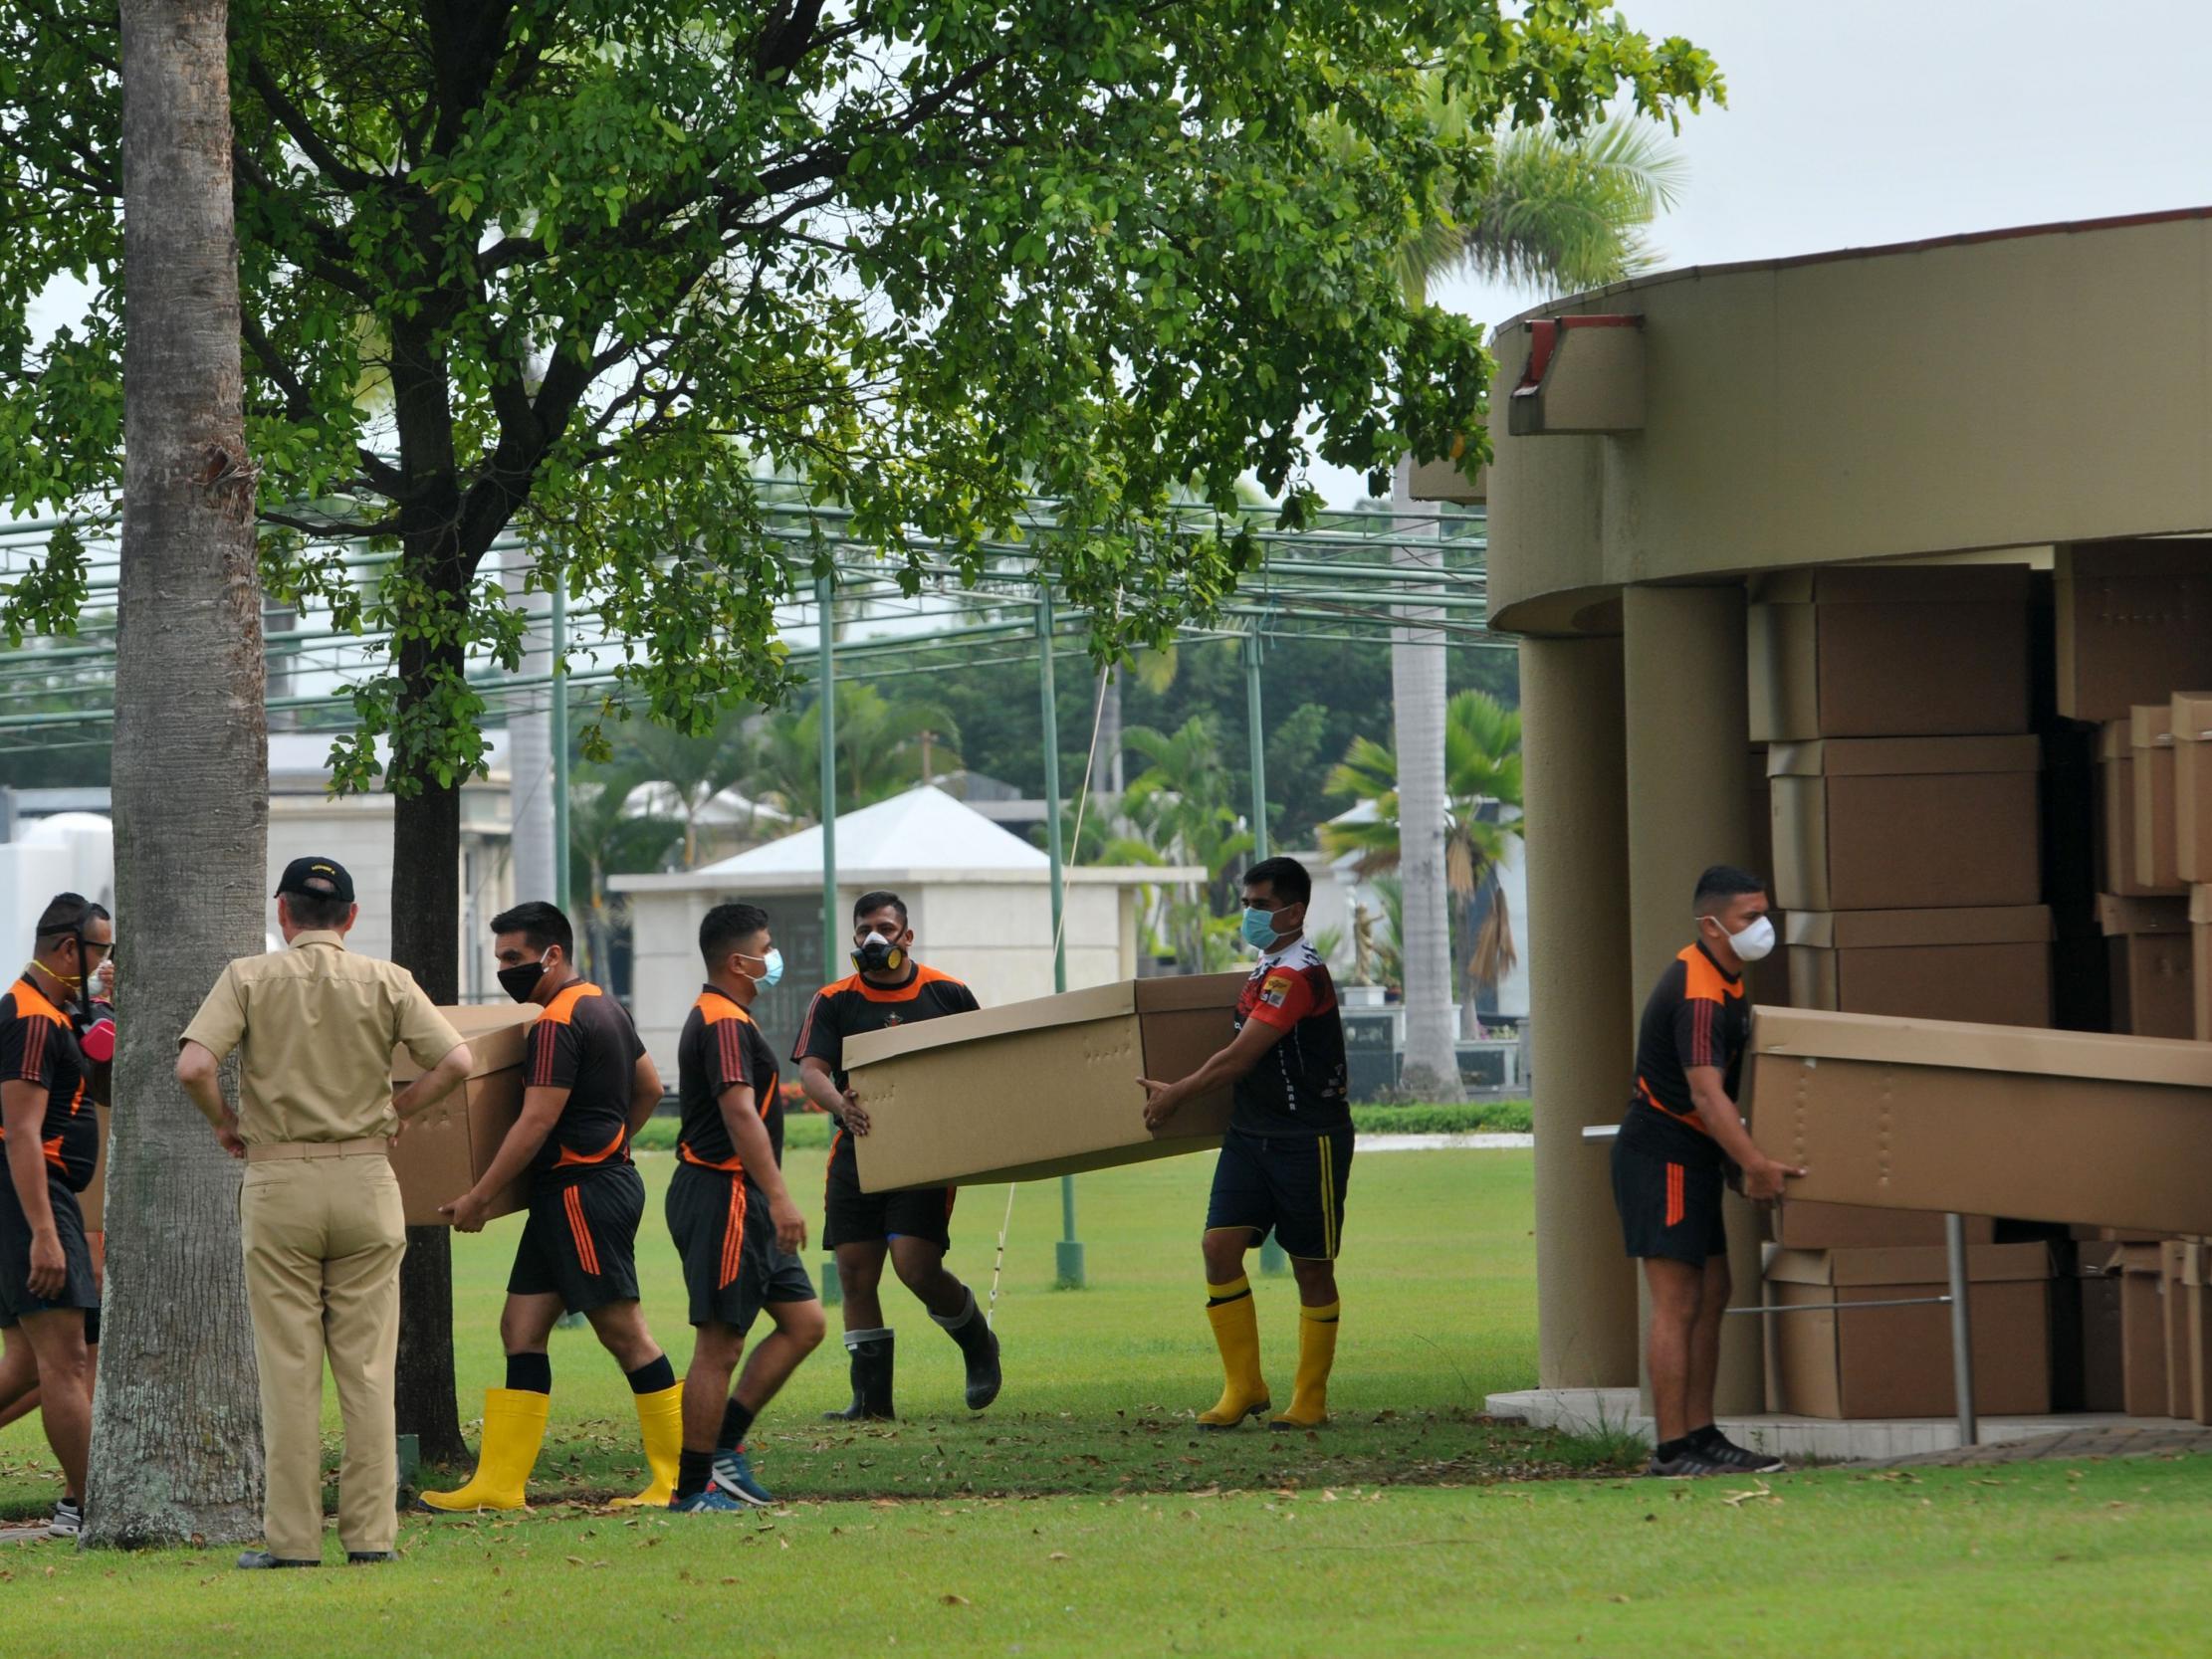 Soldiers transport cardboard boxes used as coffins at the Paque de la Paz cemetery in Guayaquil